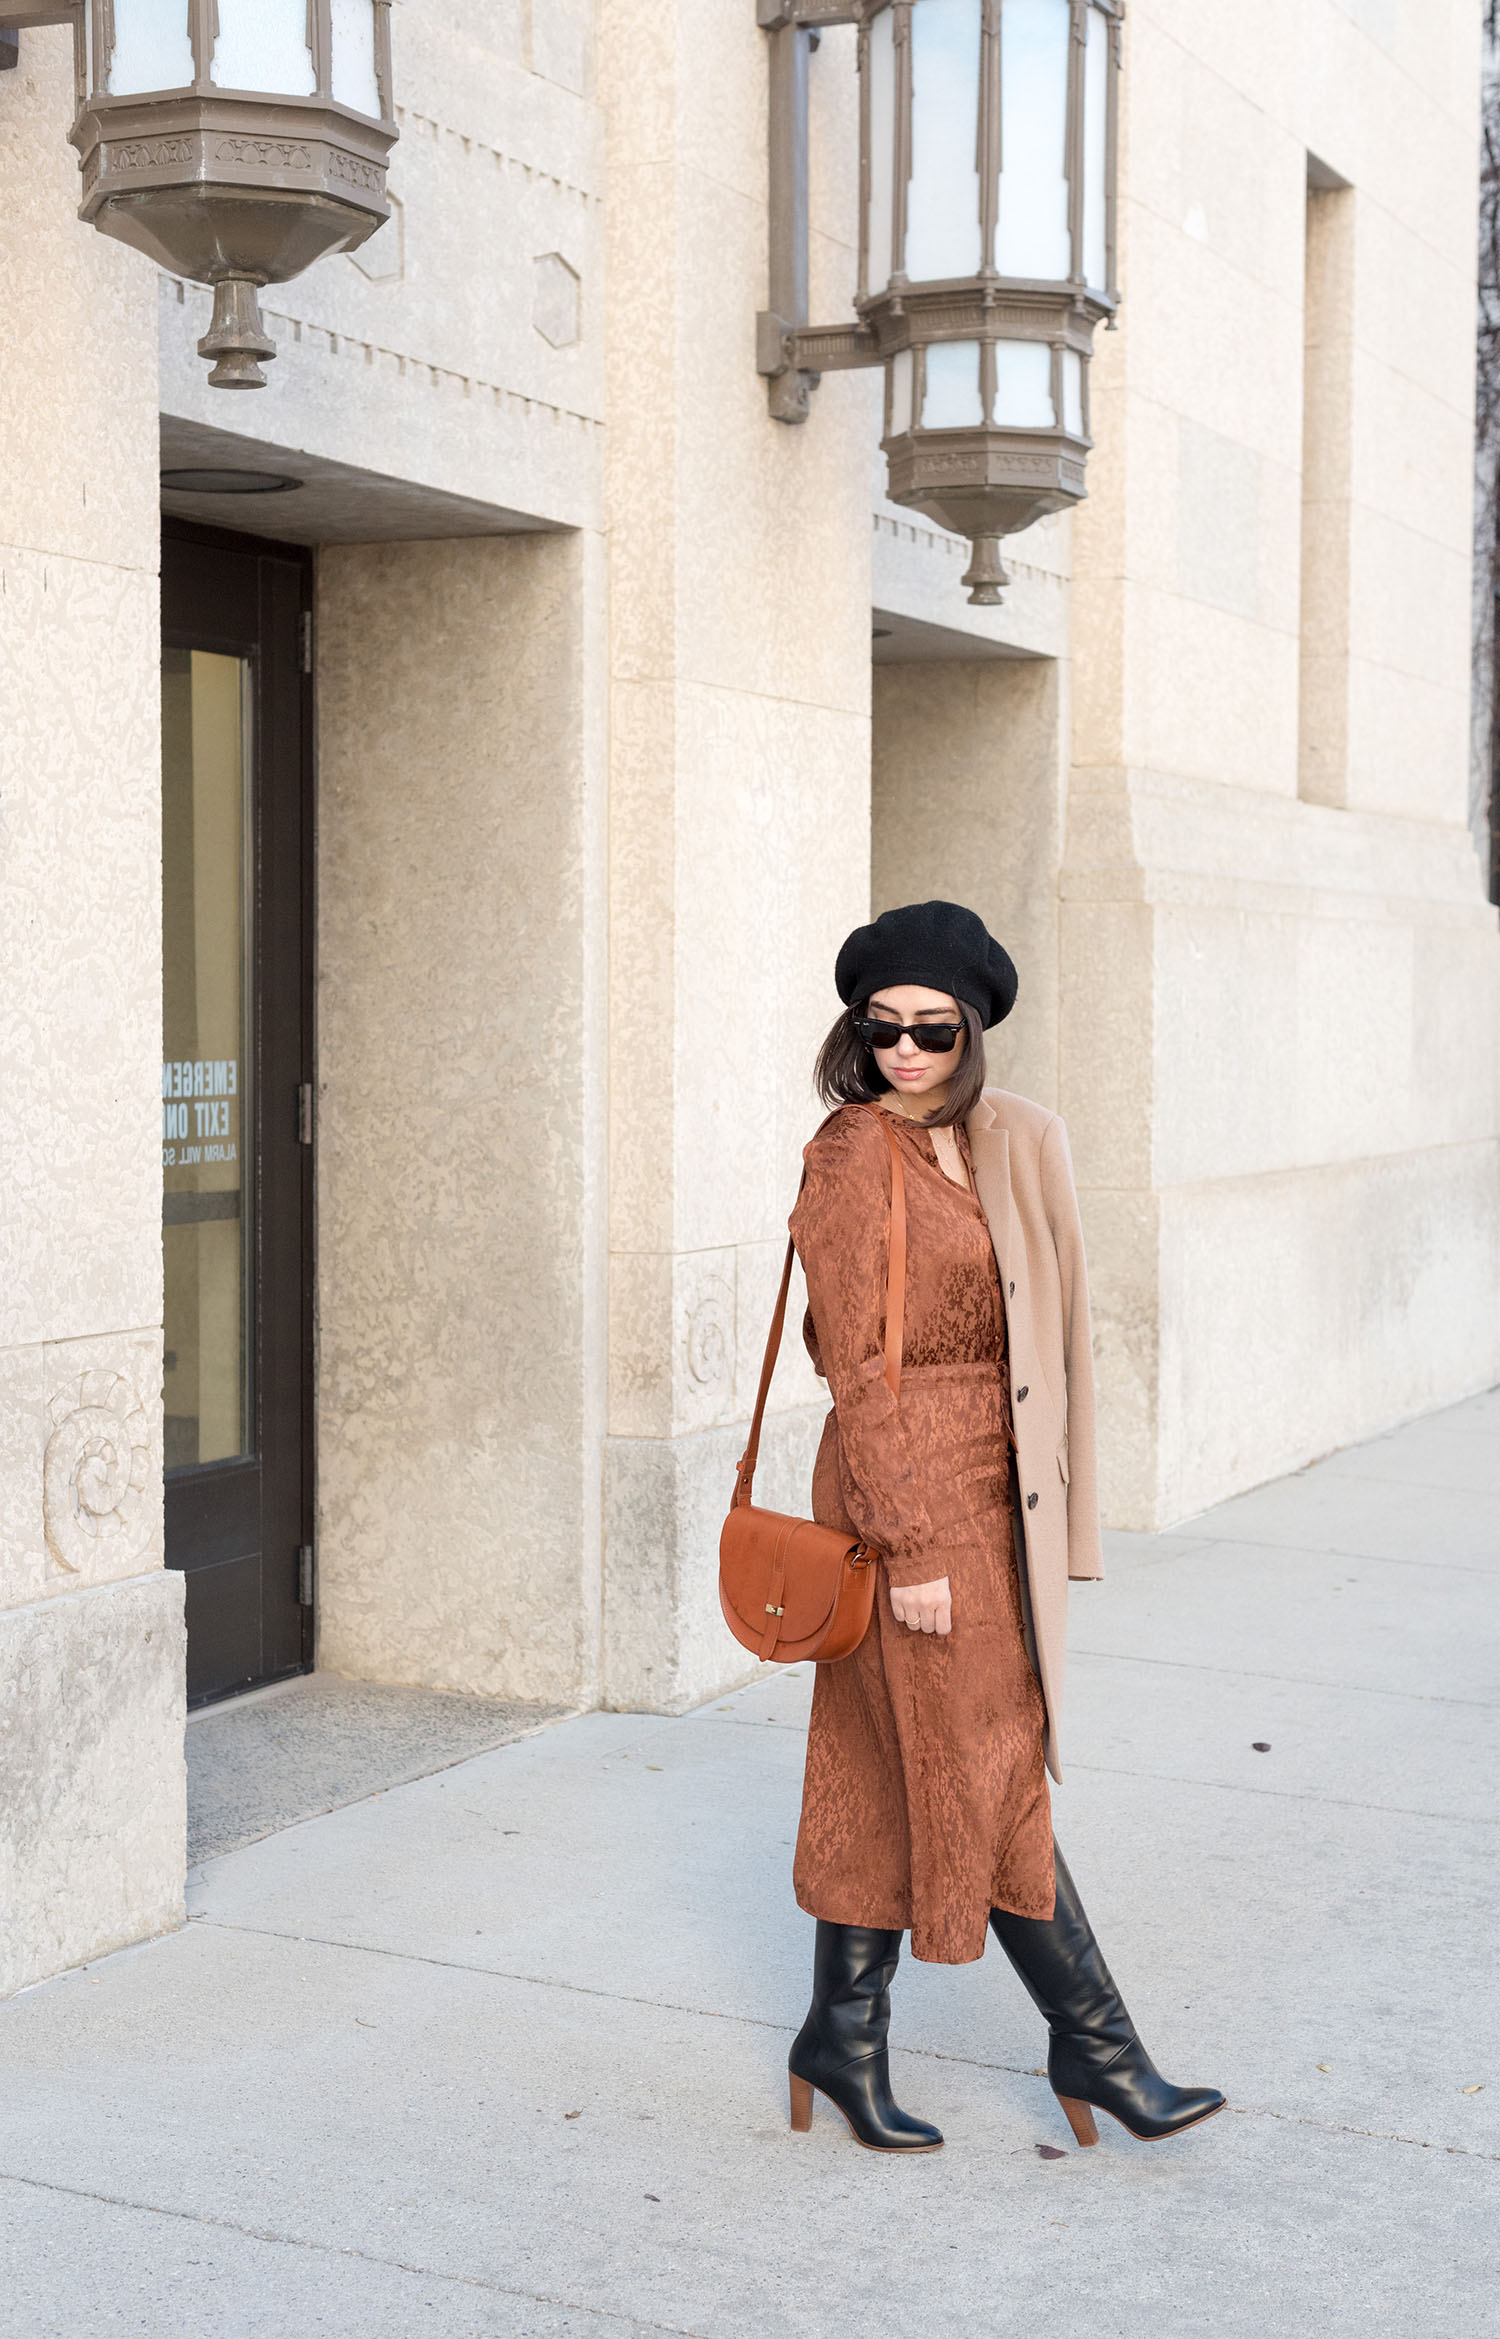 Top Canadian fashion blogger wears Sezane leather boots and an Anthropologie beret